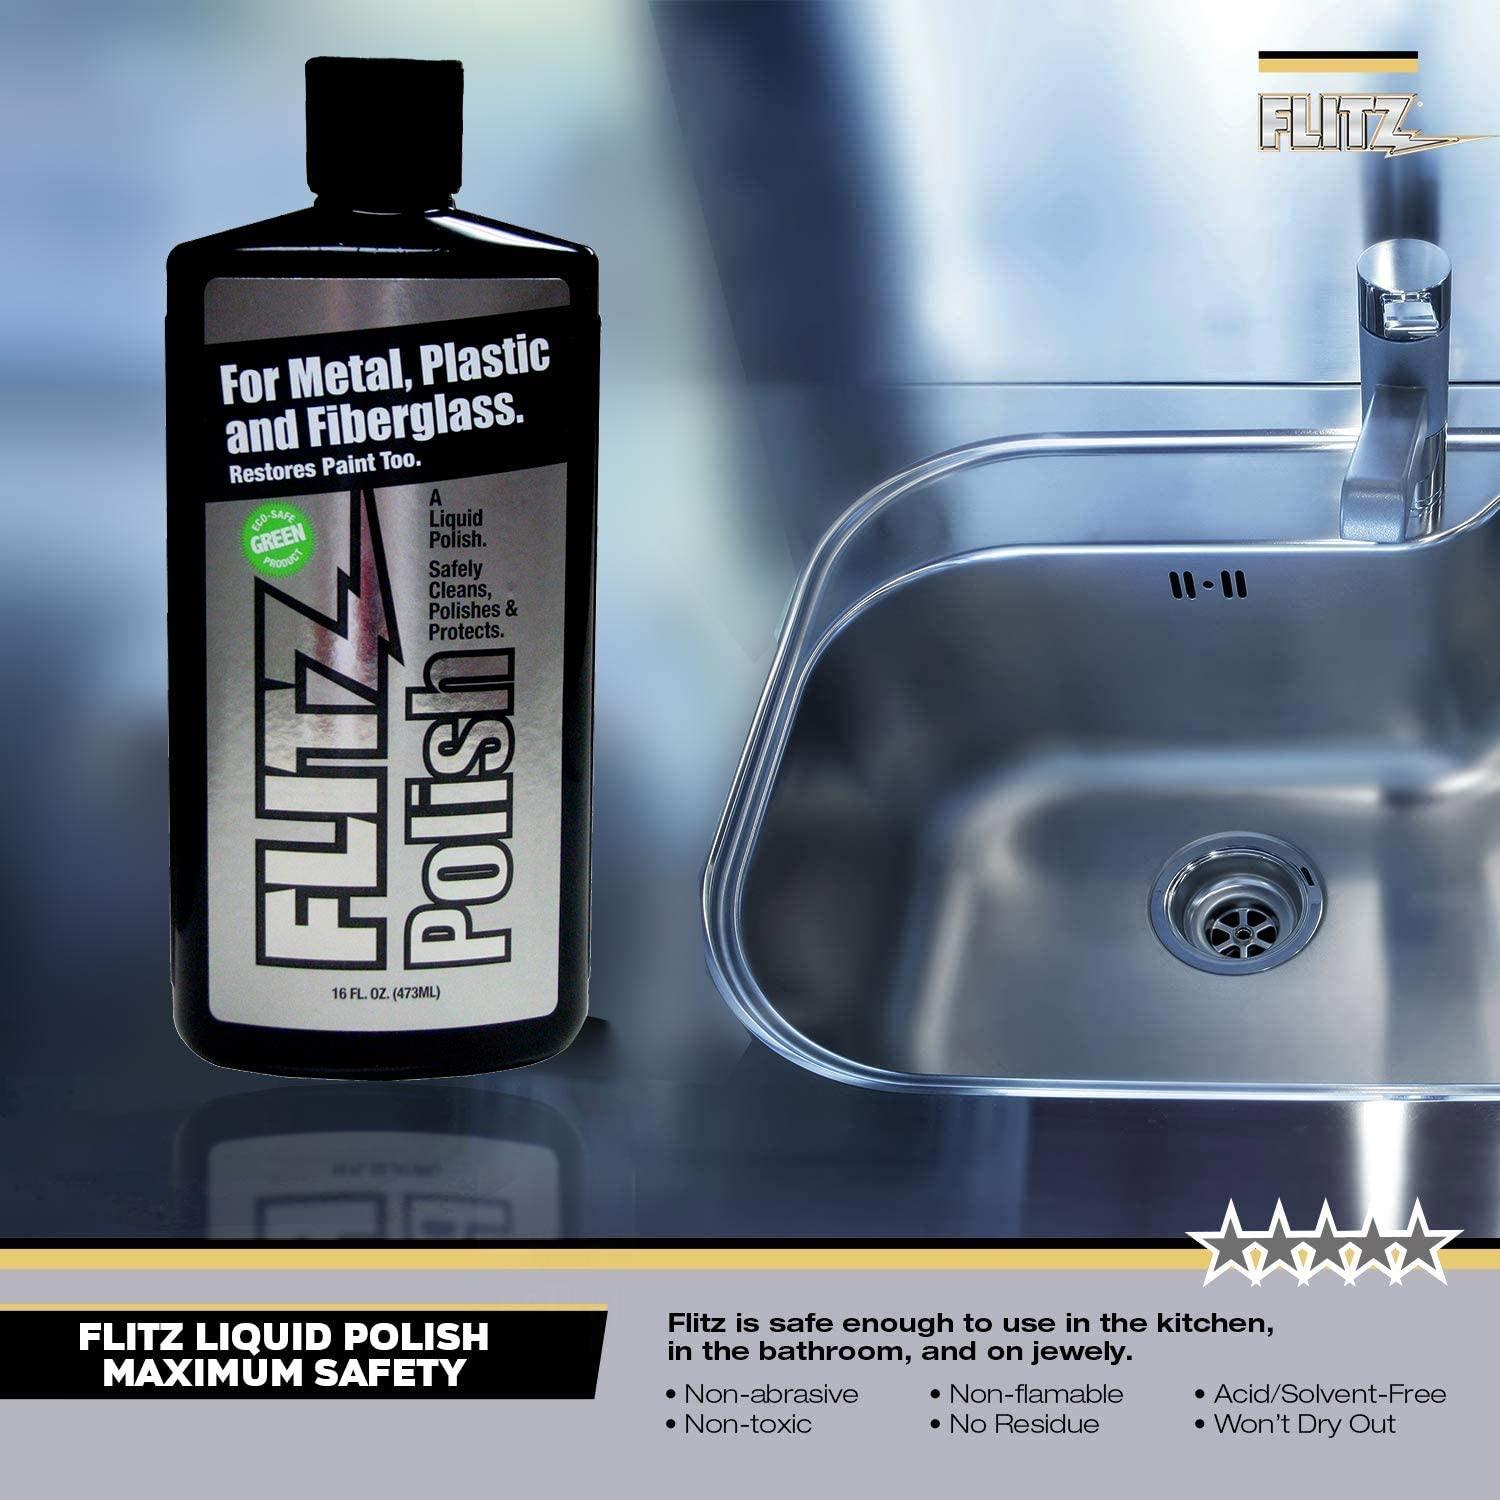  Flitz Brass and Copper Tarnish Remover, Powerful